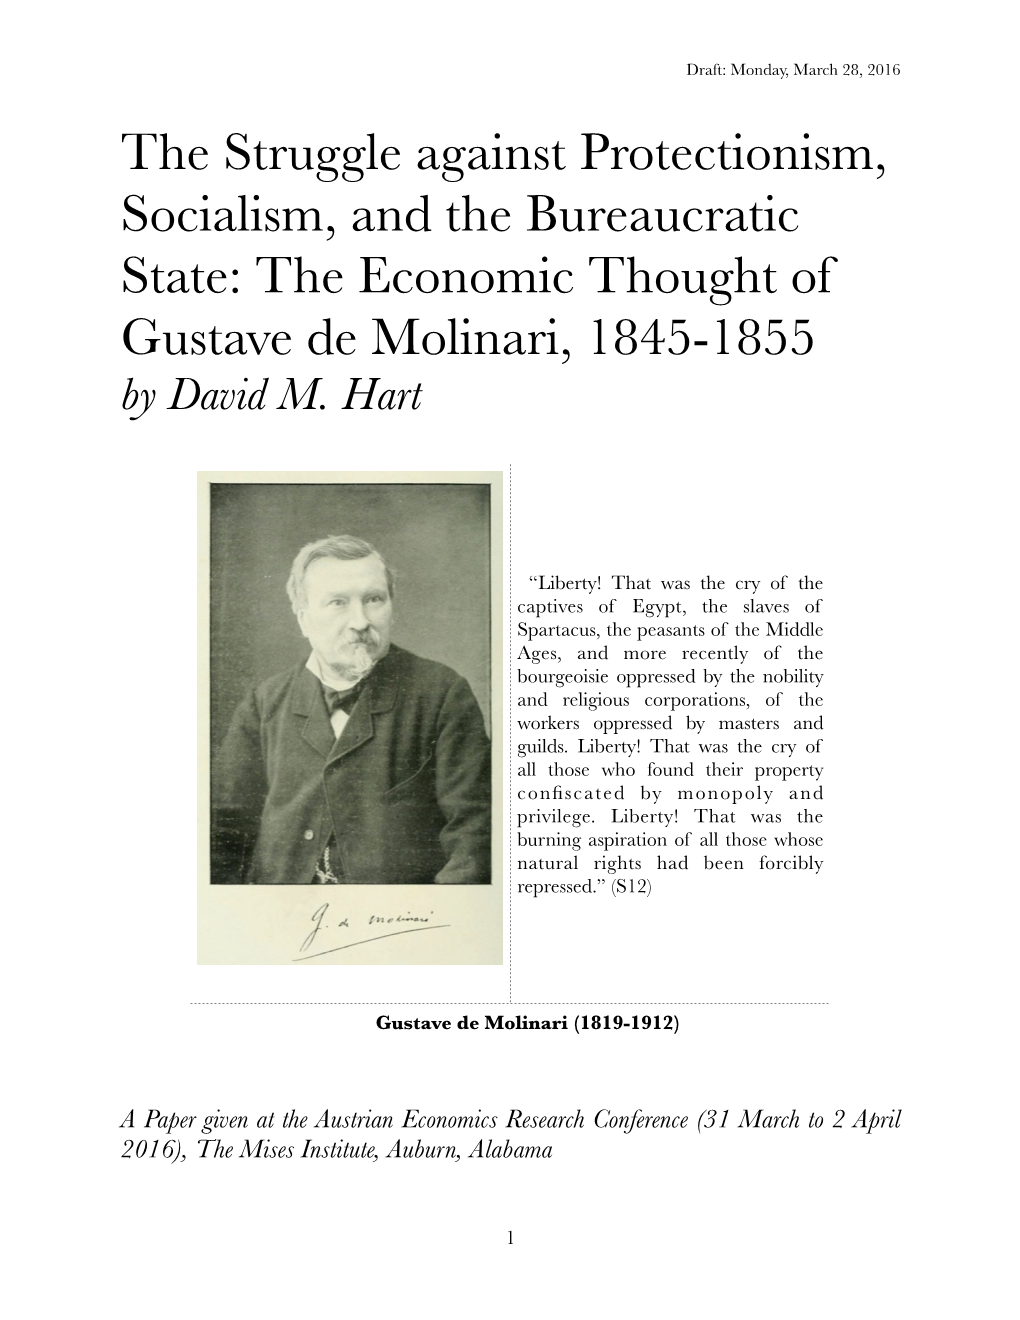 The Economic Thought of Gustave De Molinari, 1845-1855 by David M